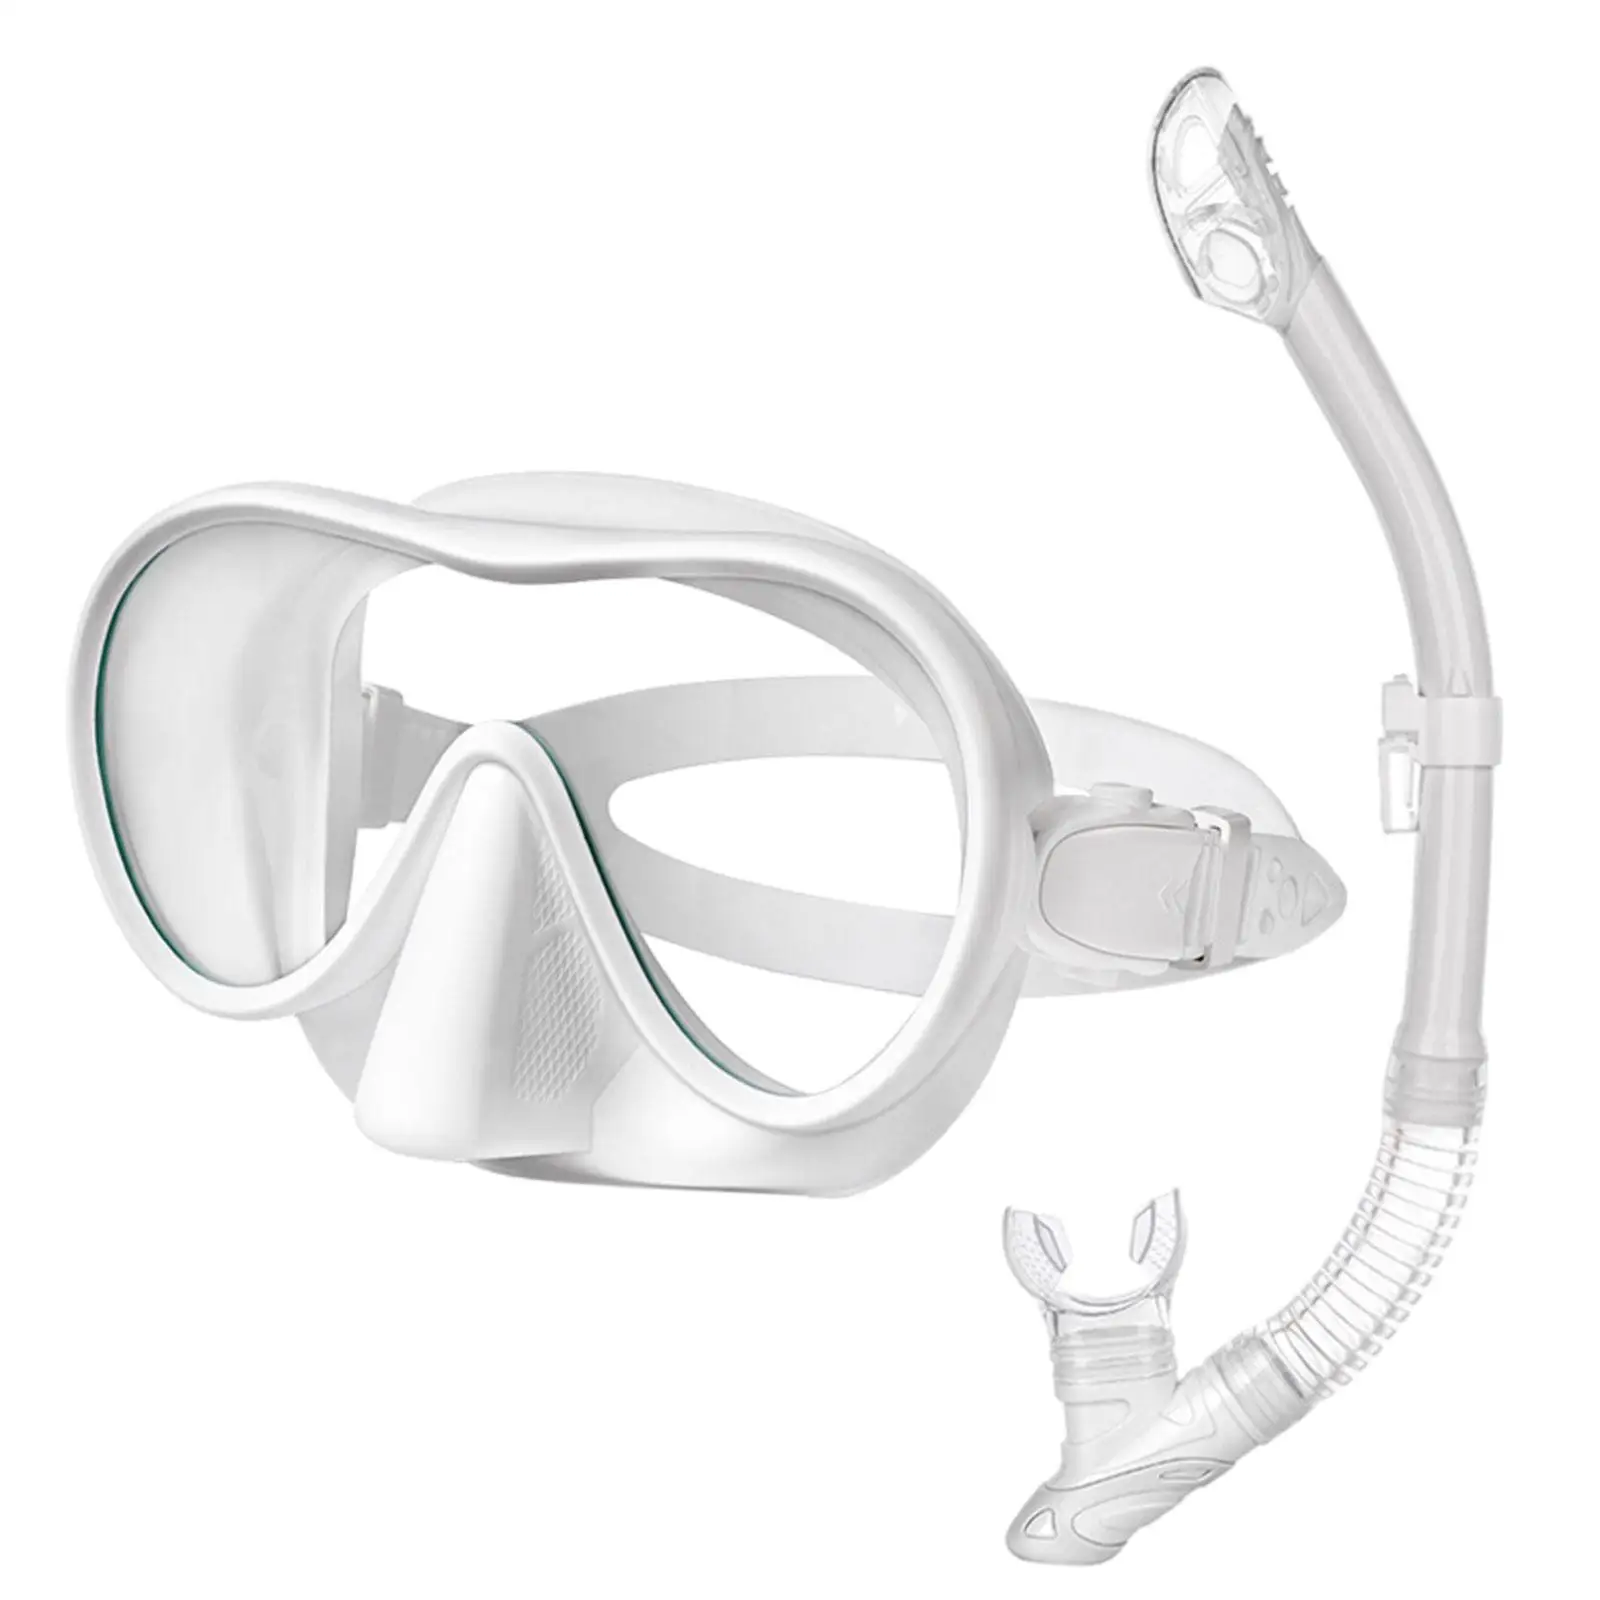 Snorkel Set Wide View Diving Mask Swim Goggles Equipment Adult Breathing Snorkel Mask Diving Goggles for Scuba Diving Snorkeling